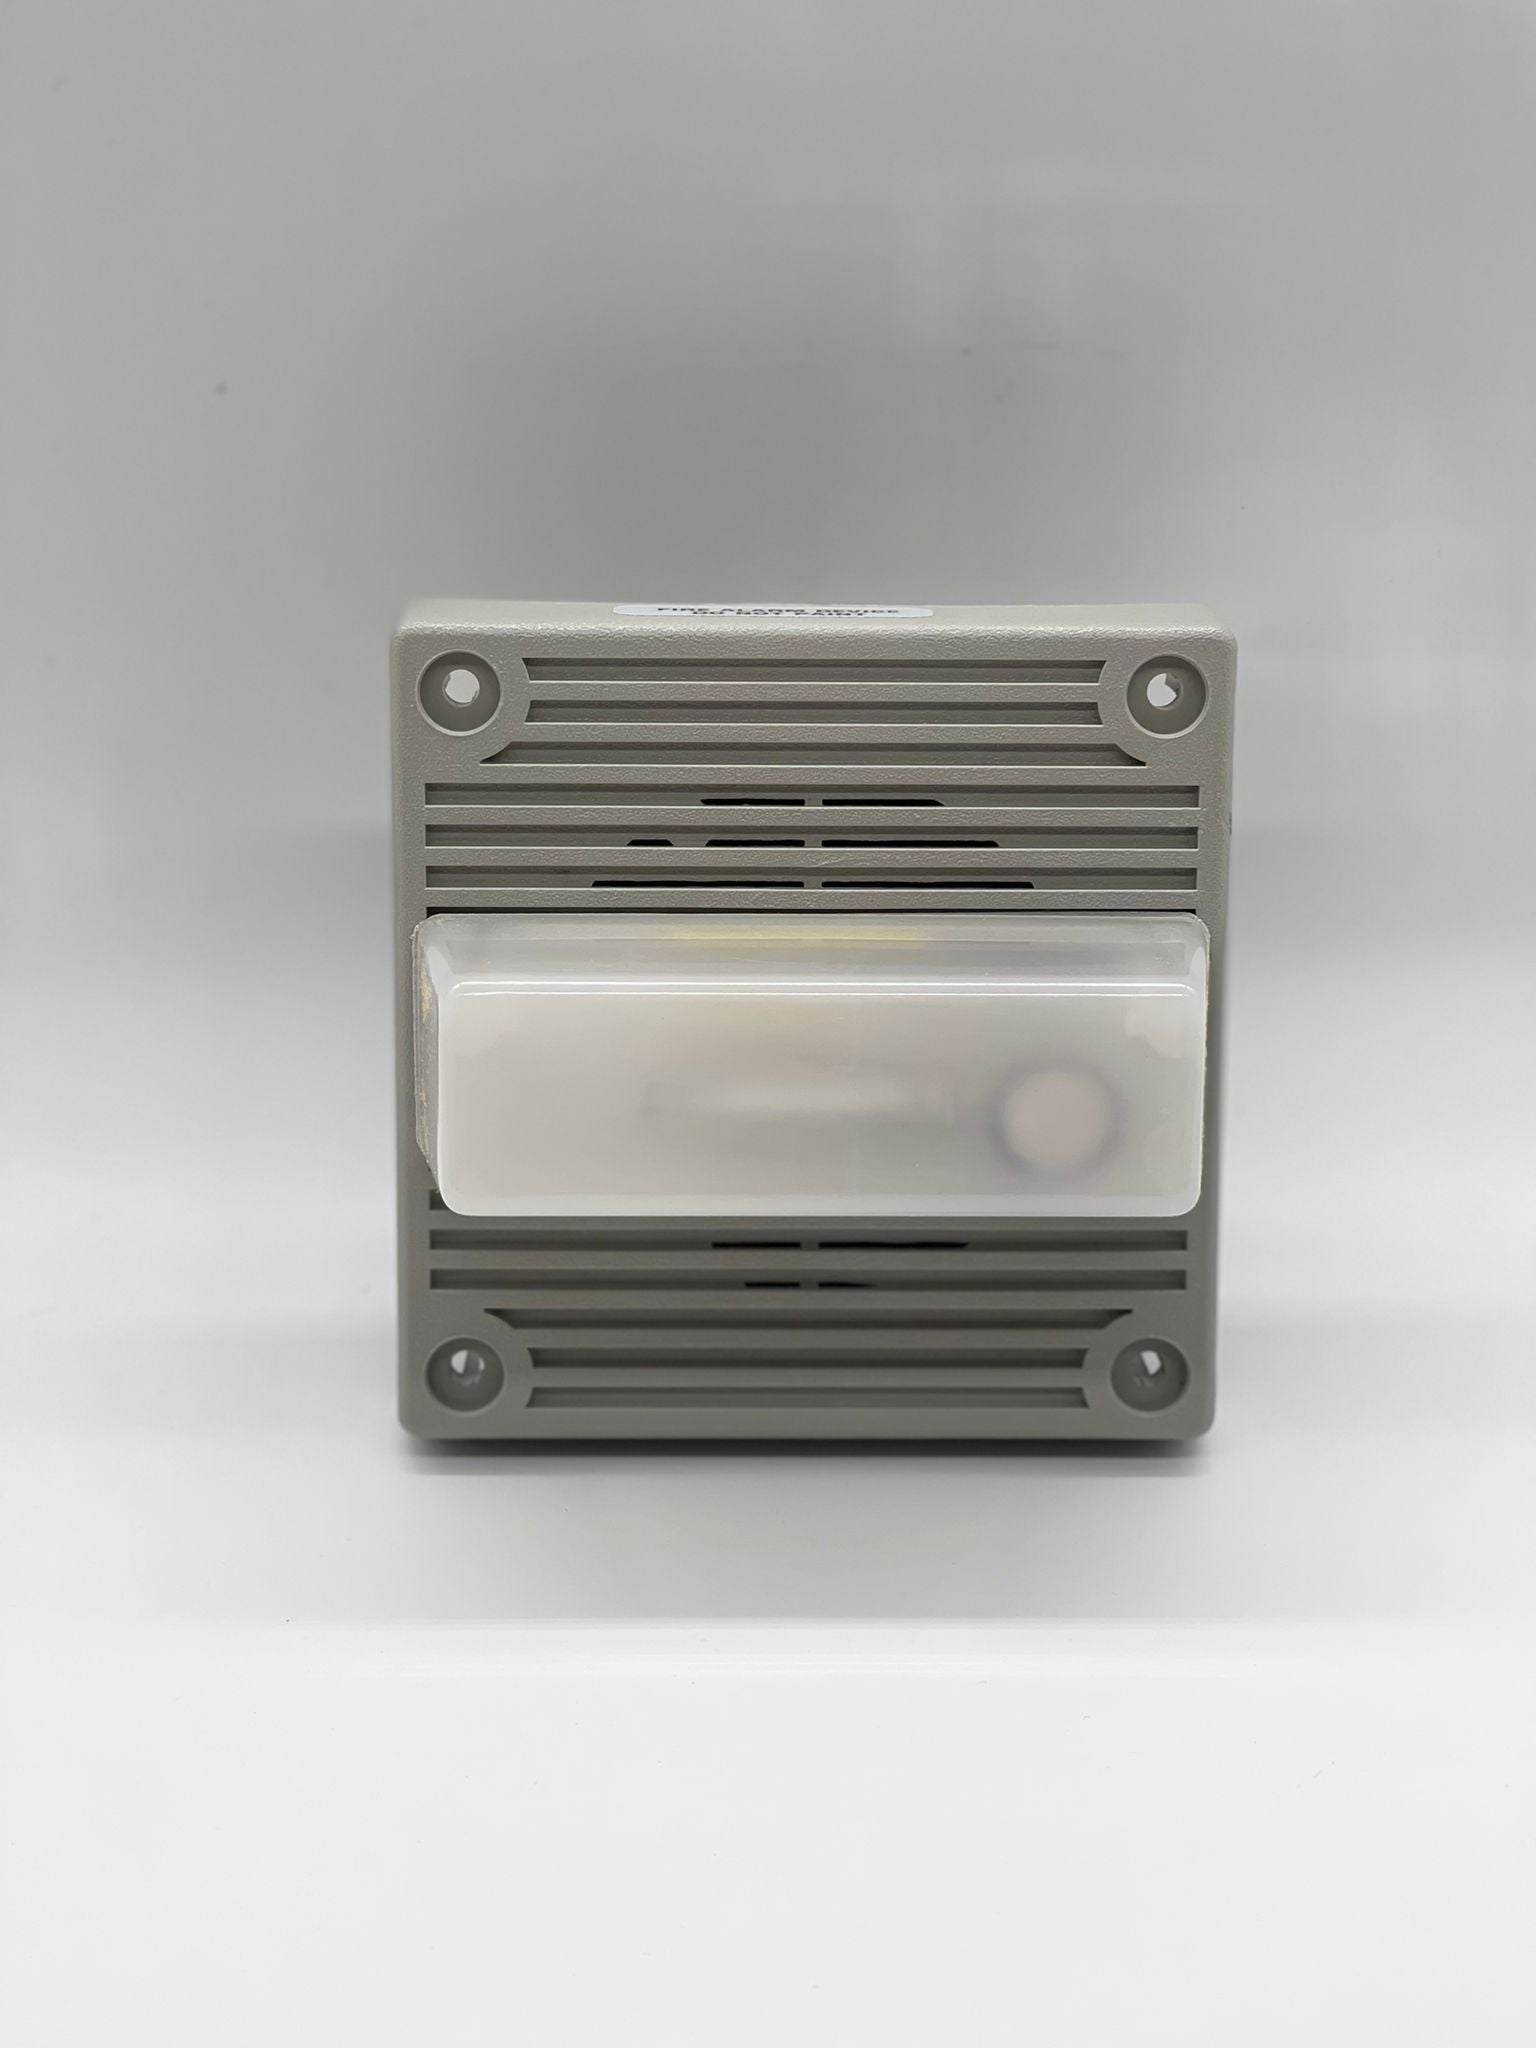 Wheelock MT4-115-WH-VNS - The Fire Alarm Supplier